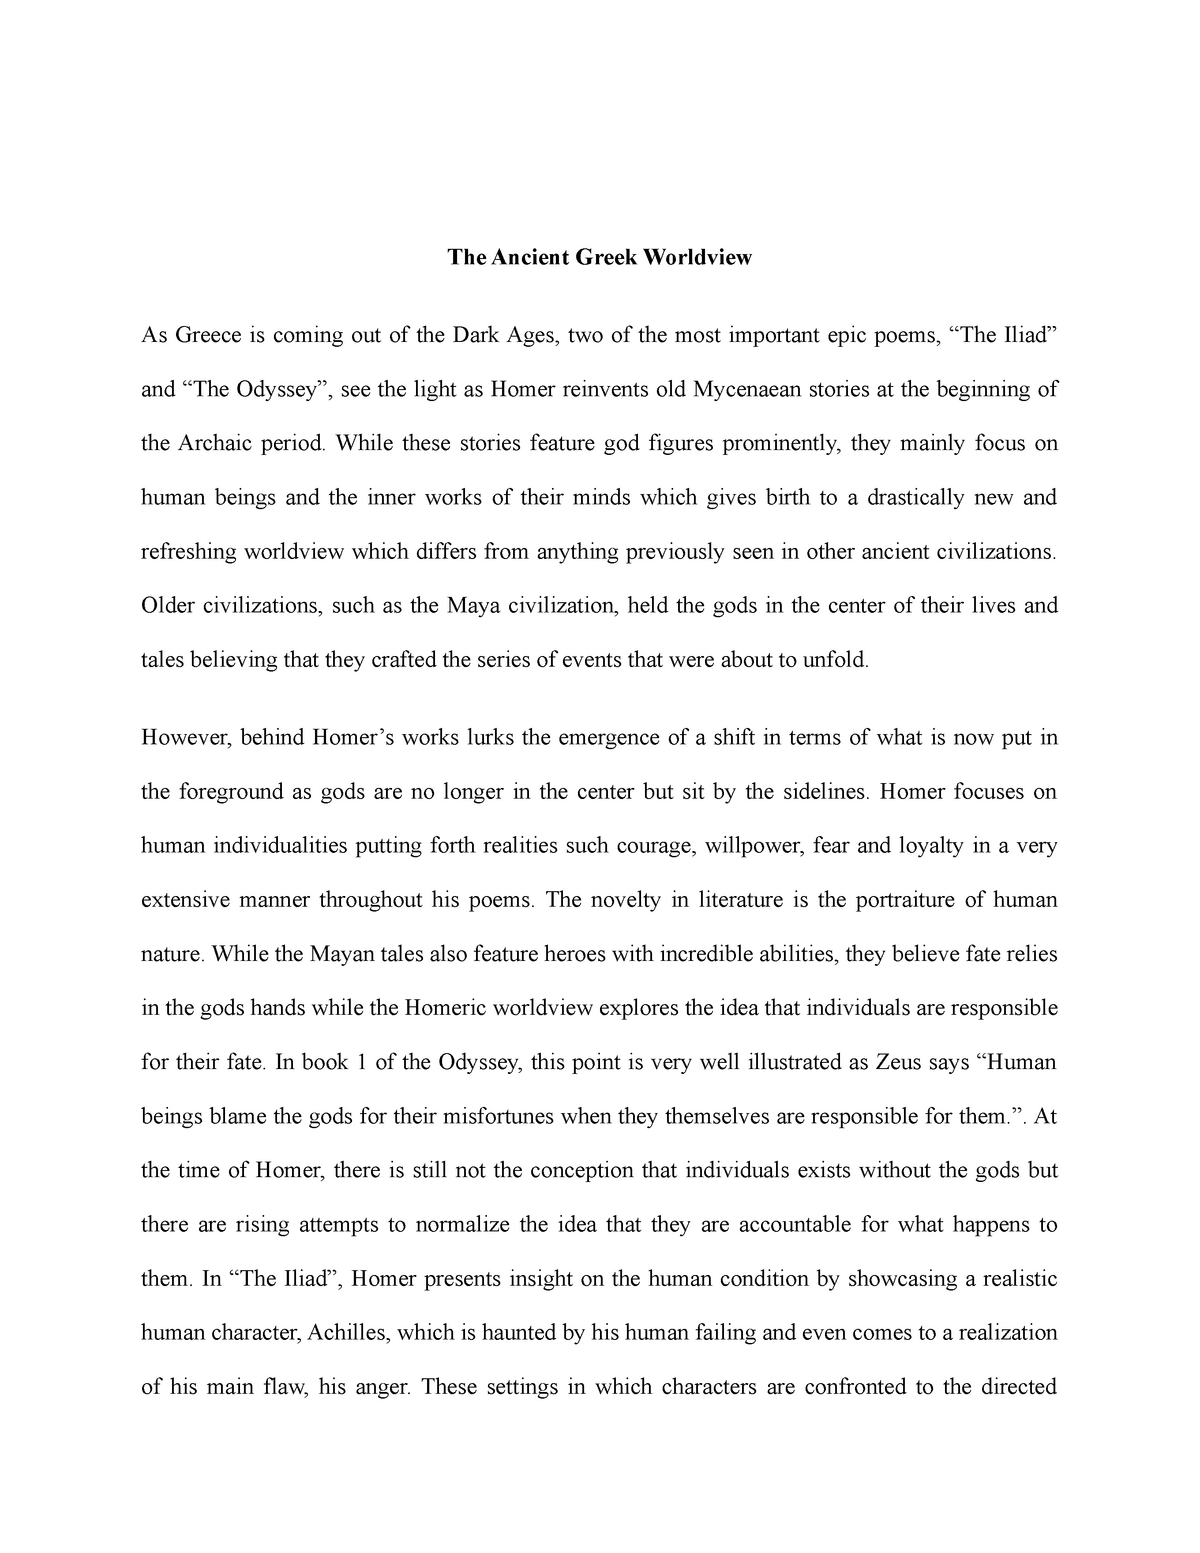 essay about ancient greece